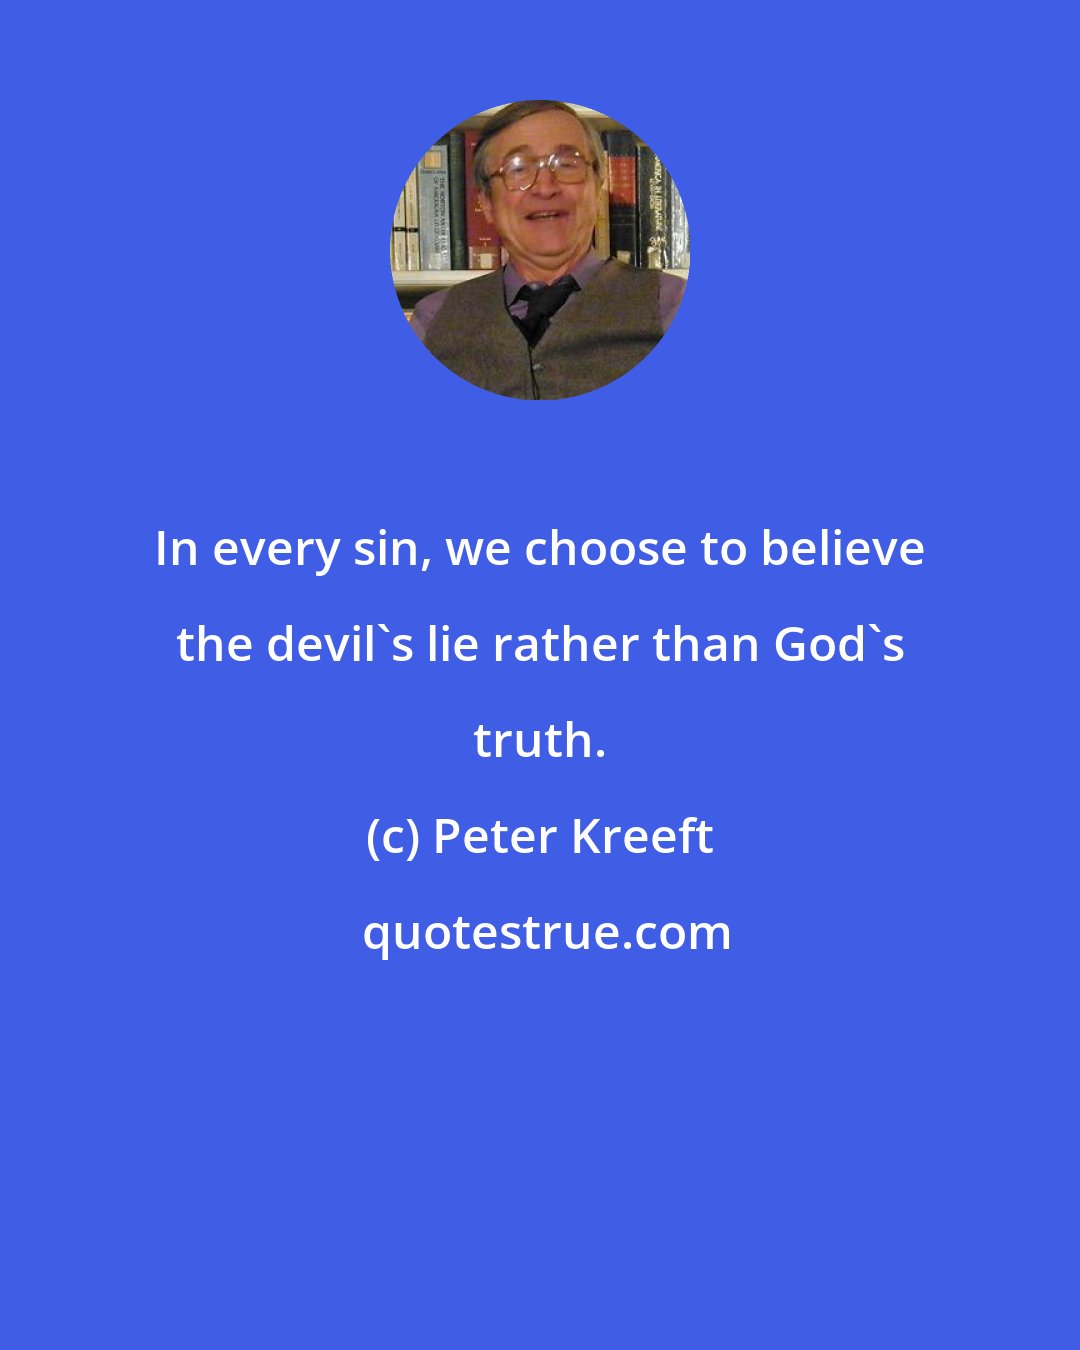 Peter Kreeft: In every sin, we choose to believe the devil's lie rather than God's truth.